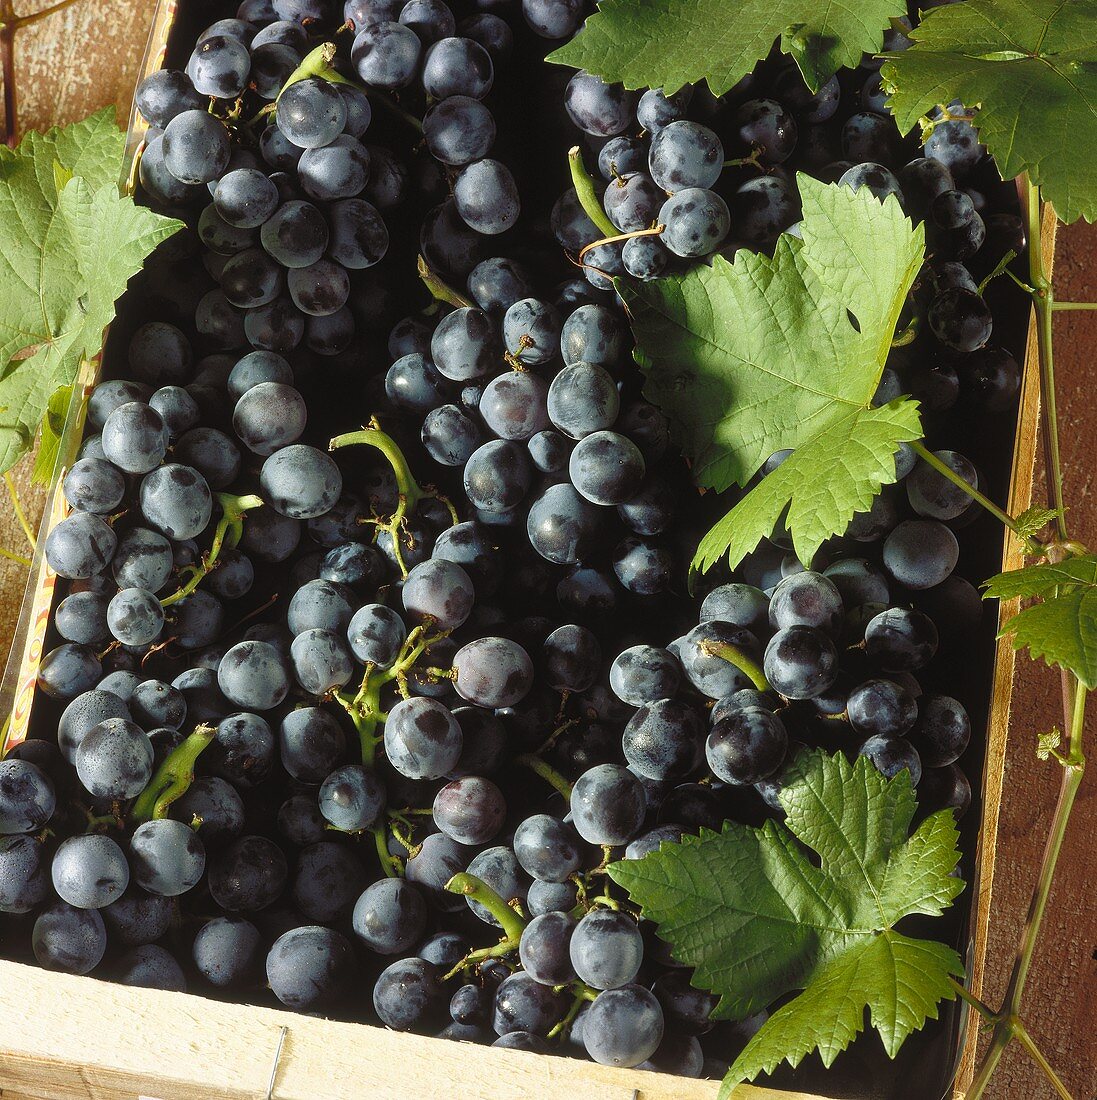 Black table grapes with leaves in a crate (close-up)